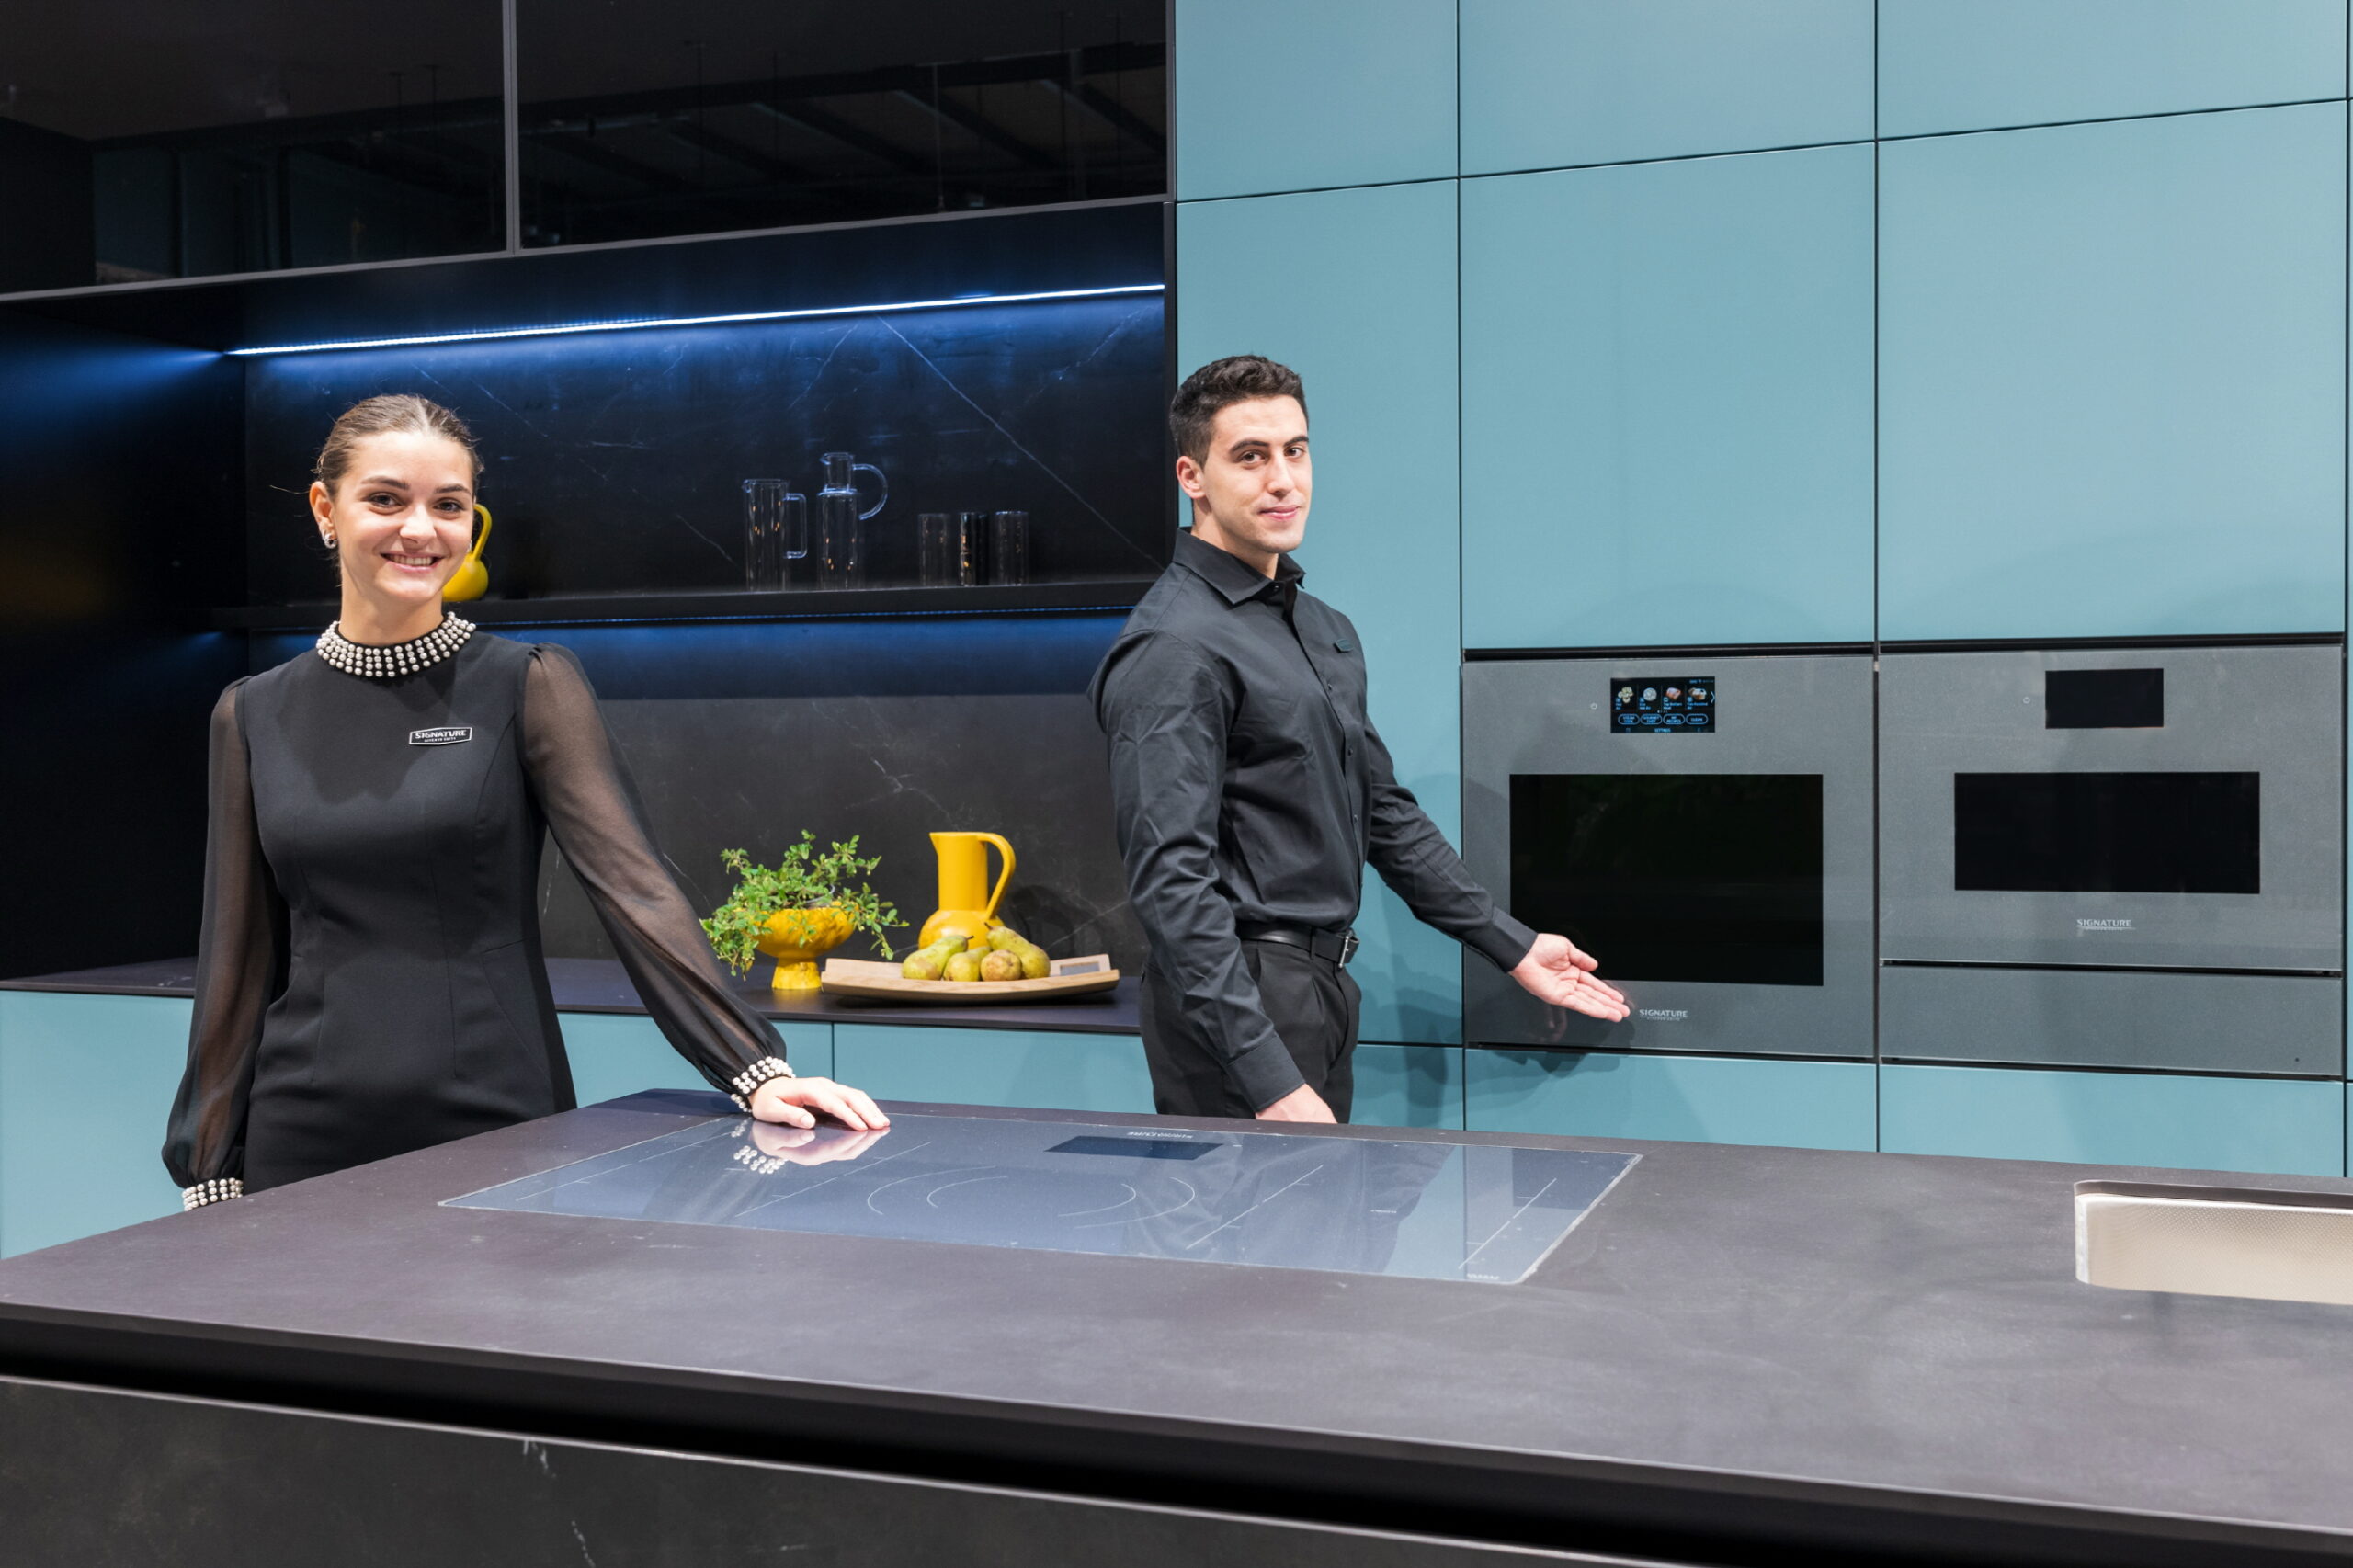 A woman on the left is standing next to the Signature Kitchen Suite 36-inch induction and a man is indicating the Signature Kitchen Suite 24-inch steam oven